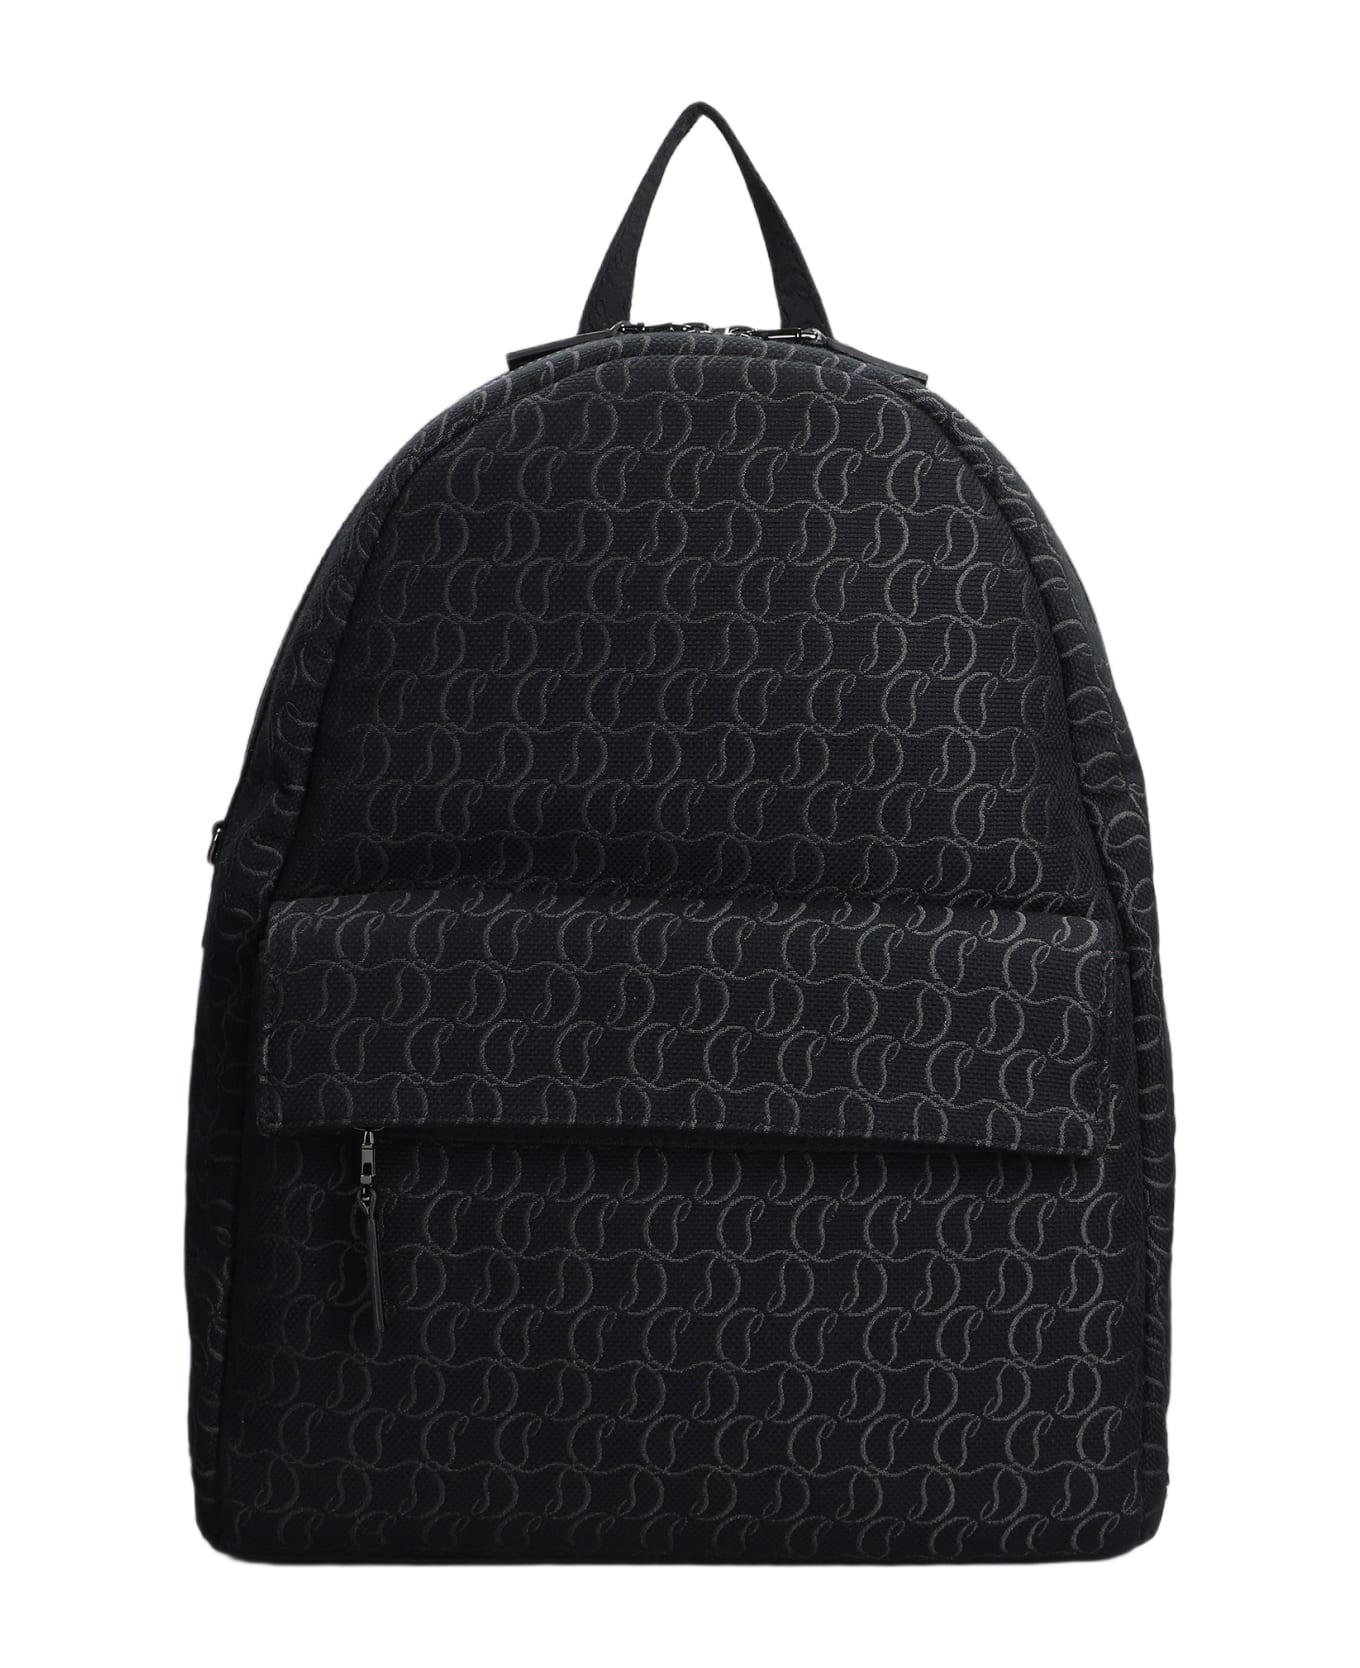 Christian Louboutin Zip N Flap Backpack In Black Cotton - black バックパック